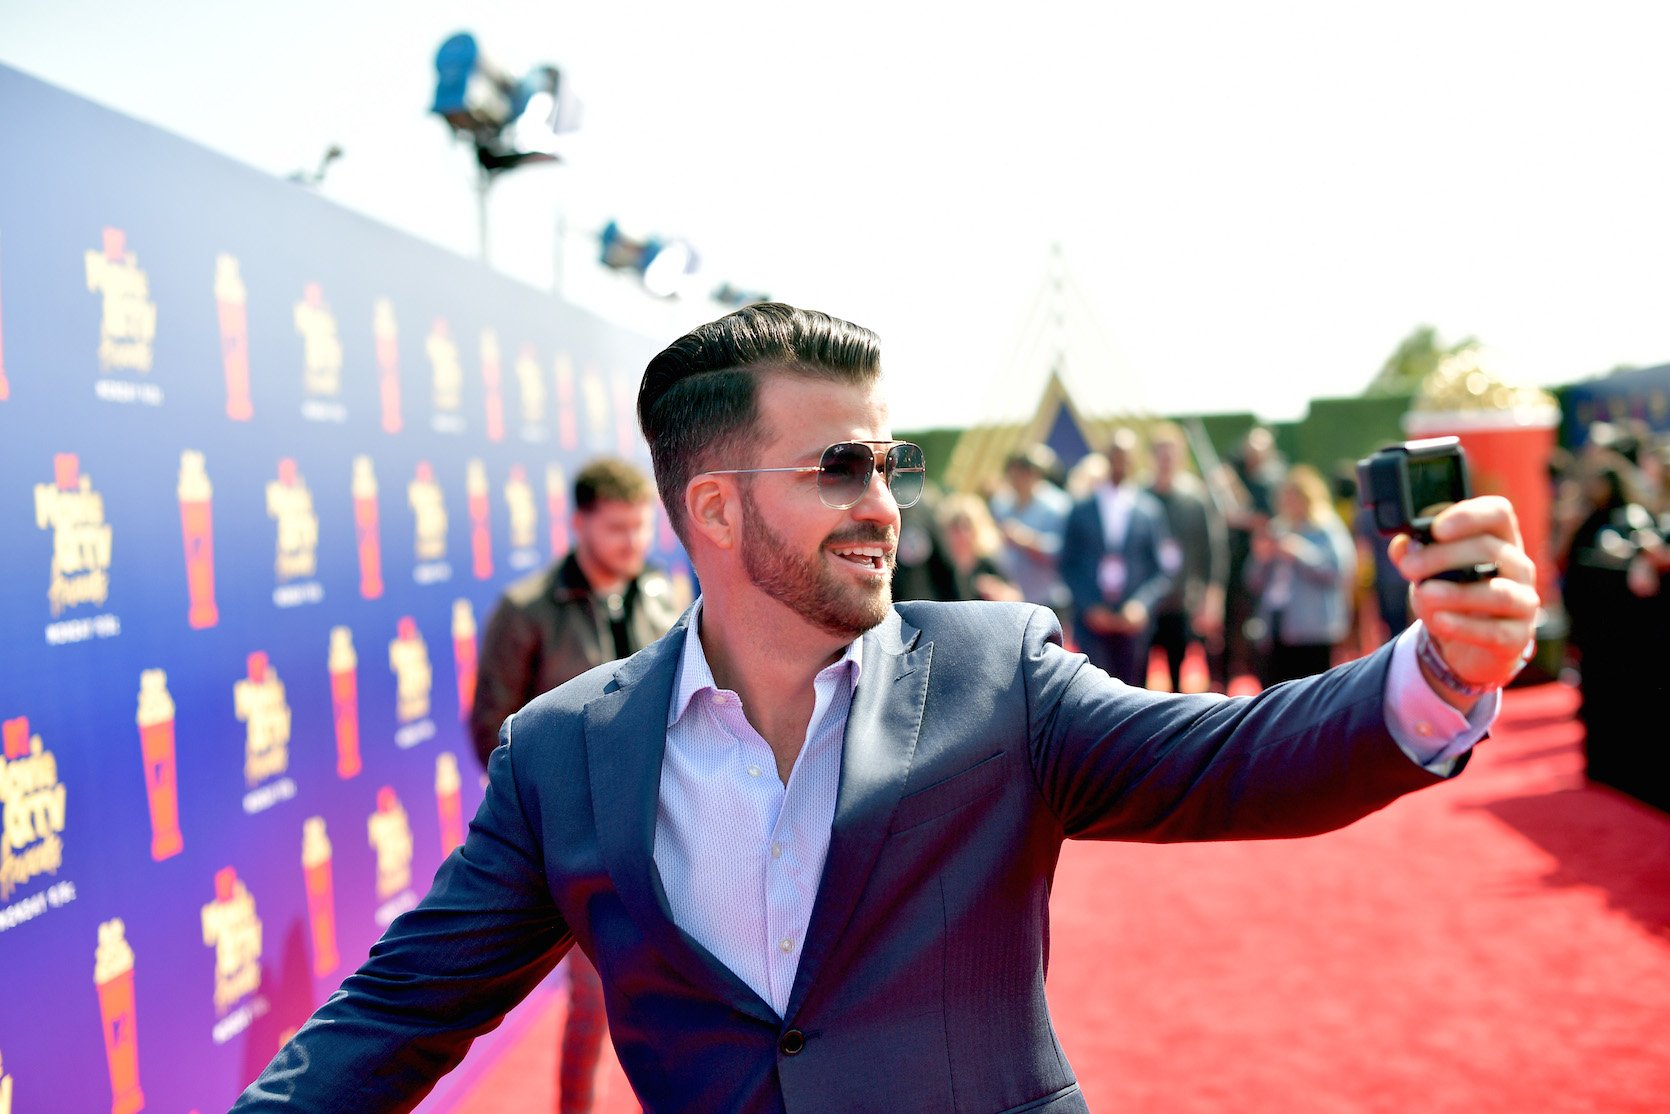 Johnny 'Bananas' Devenanzio from MTV's 'The Challenge' smiling on the red carpet